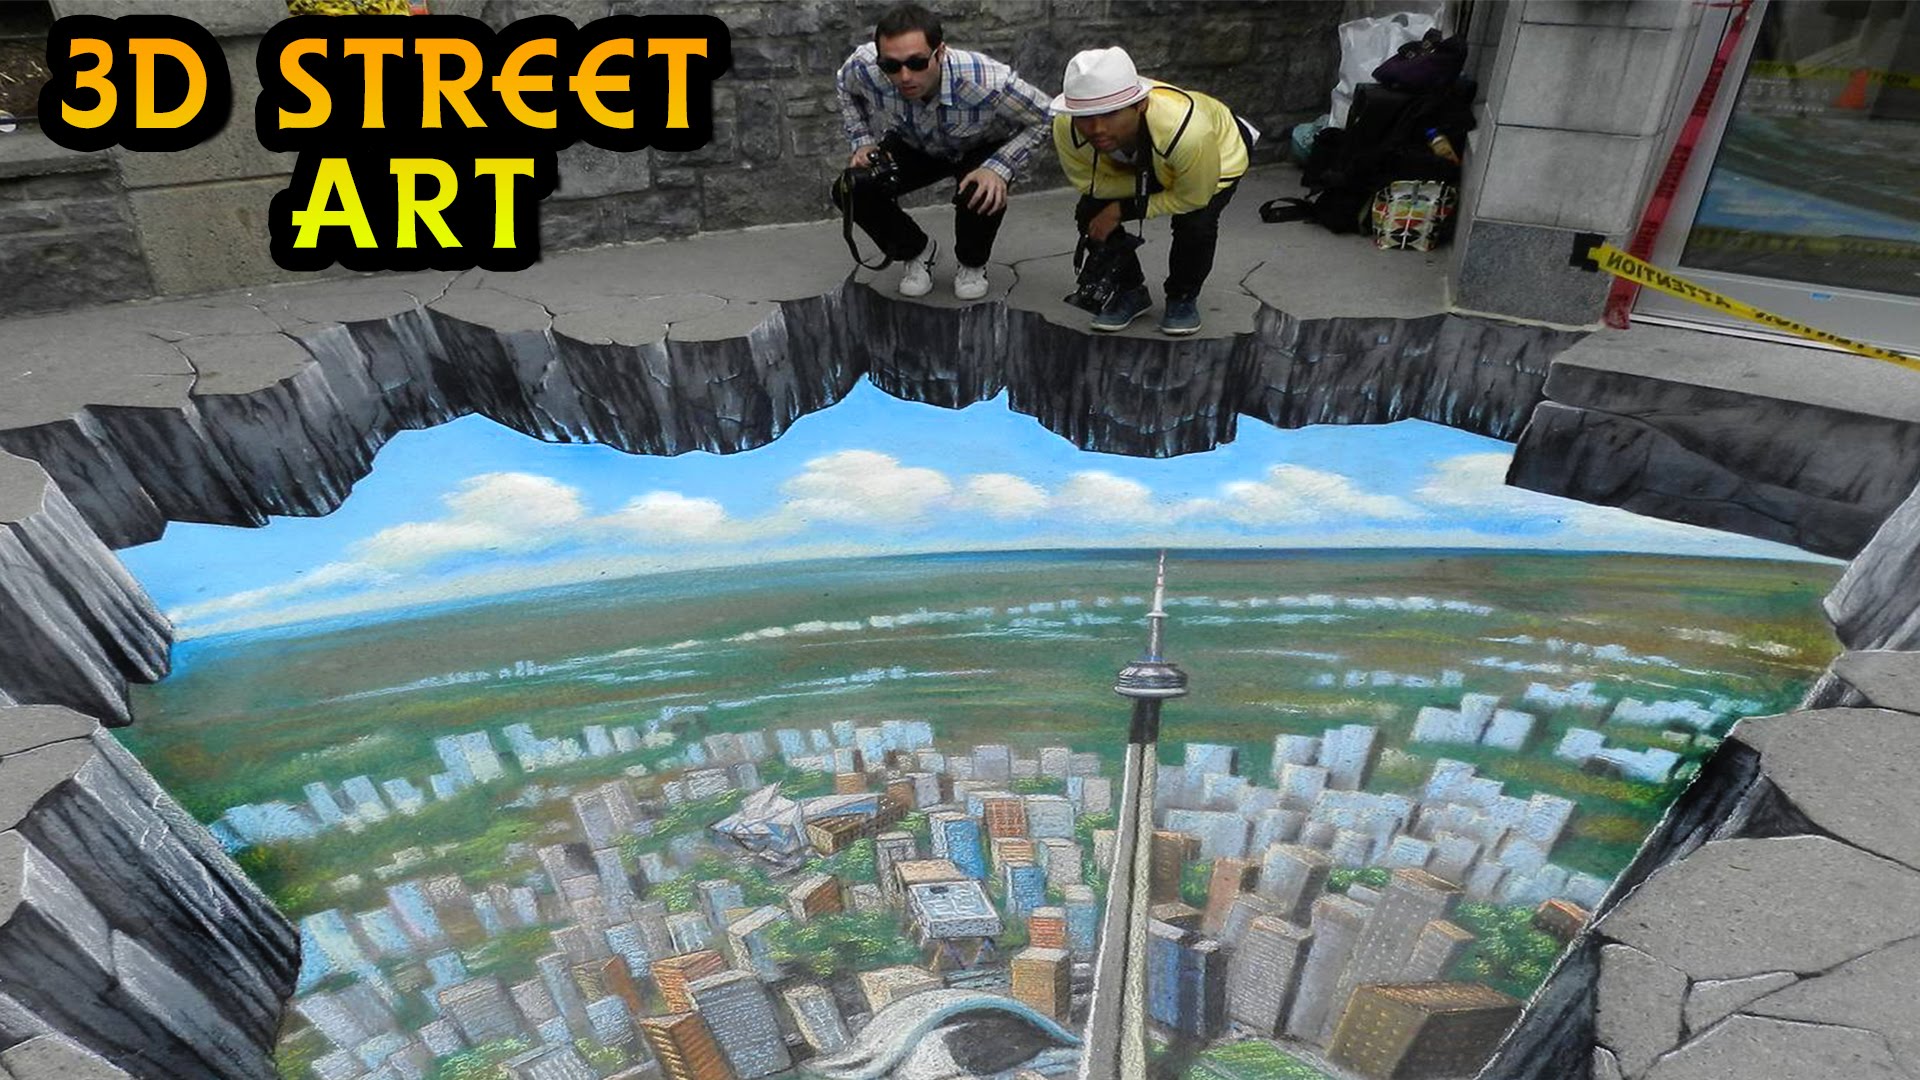 63 Mind Blowing 3D Street Art Illusions Compilation | Optical Illusions & 3D Paintings